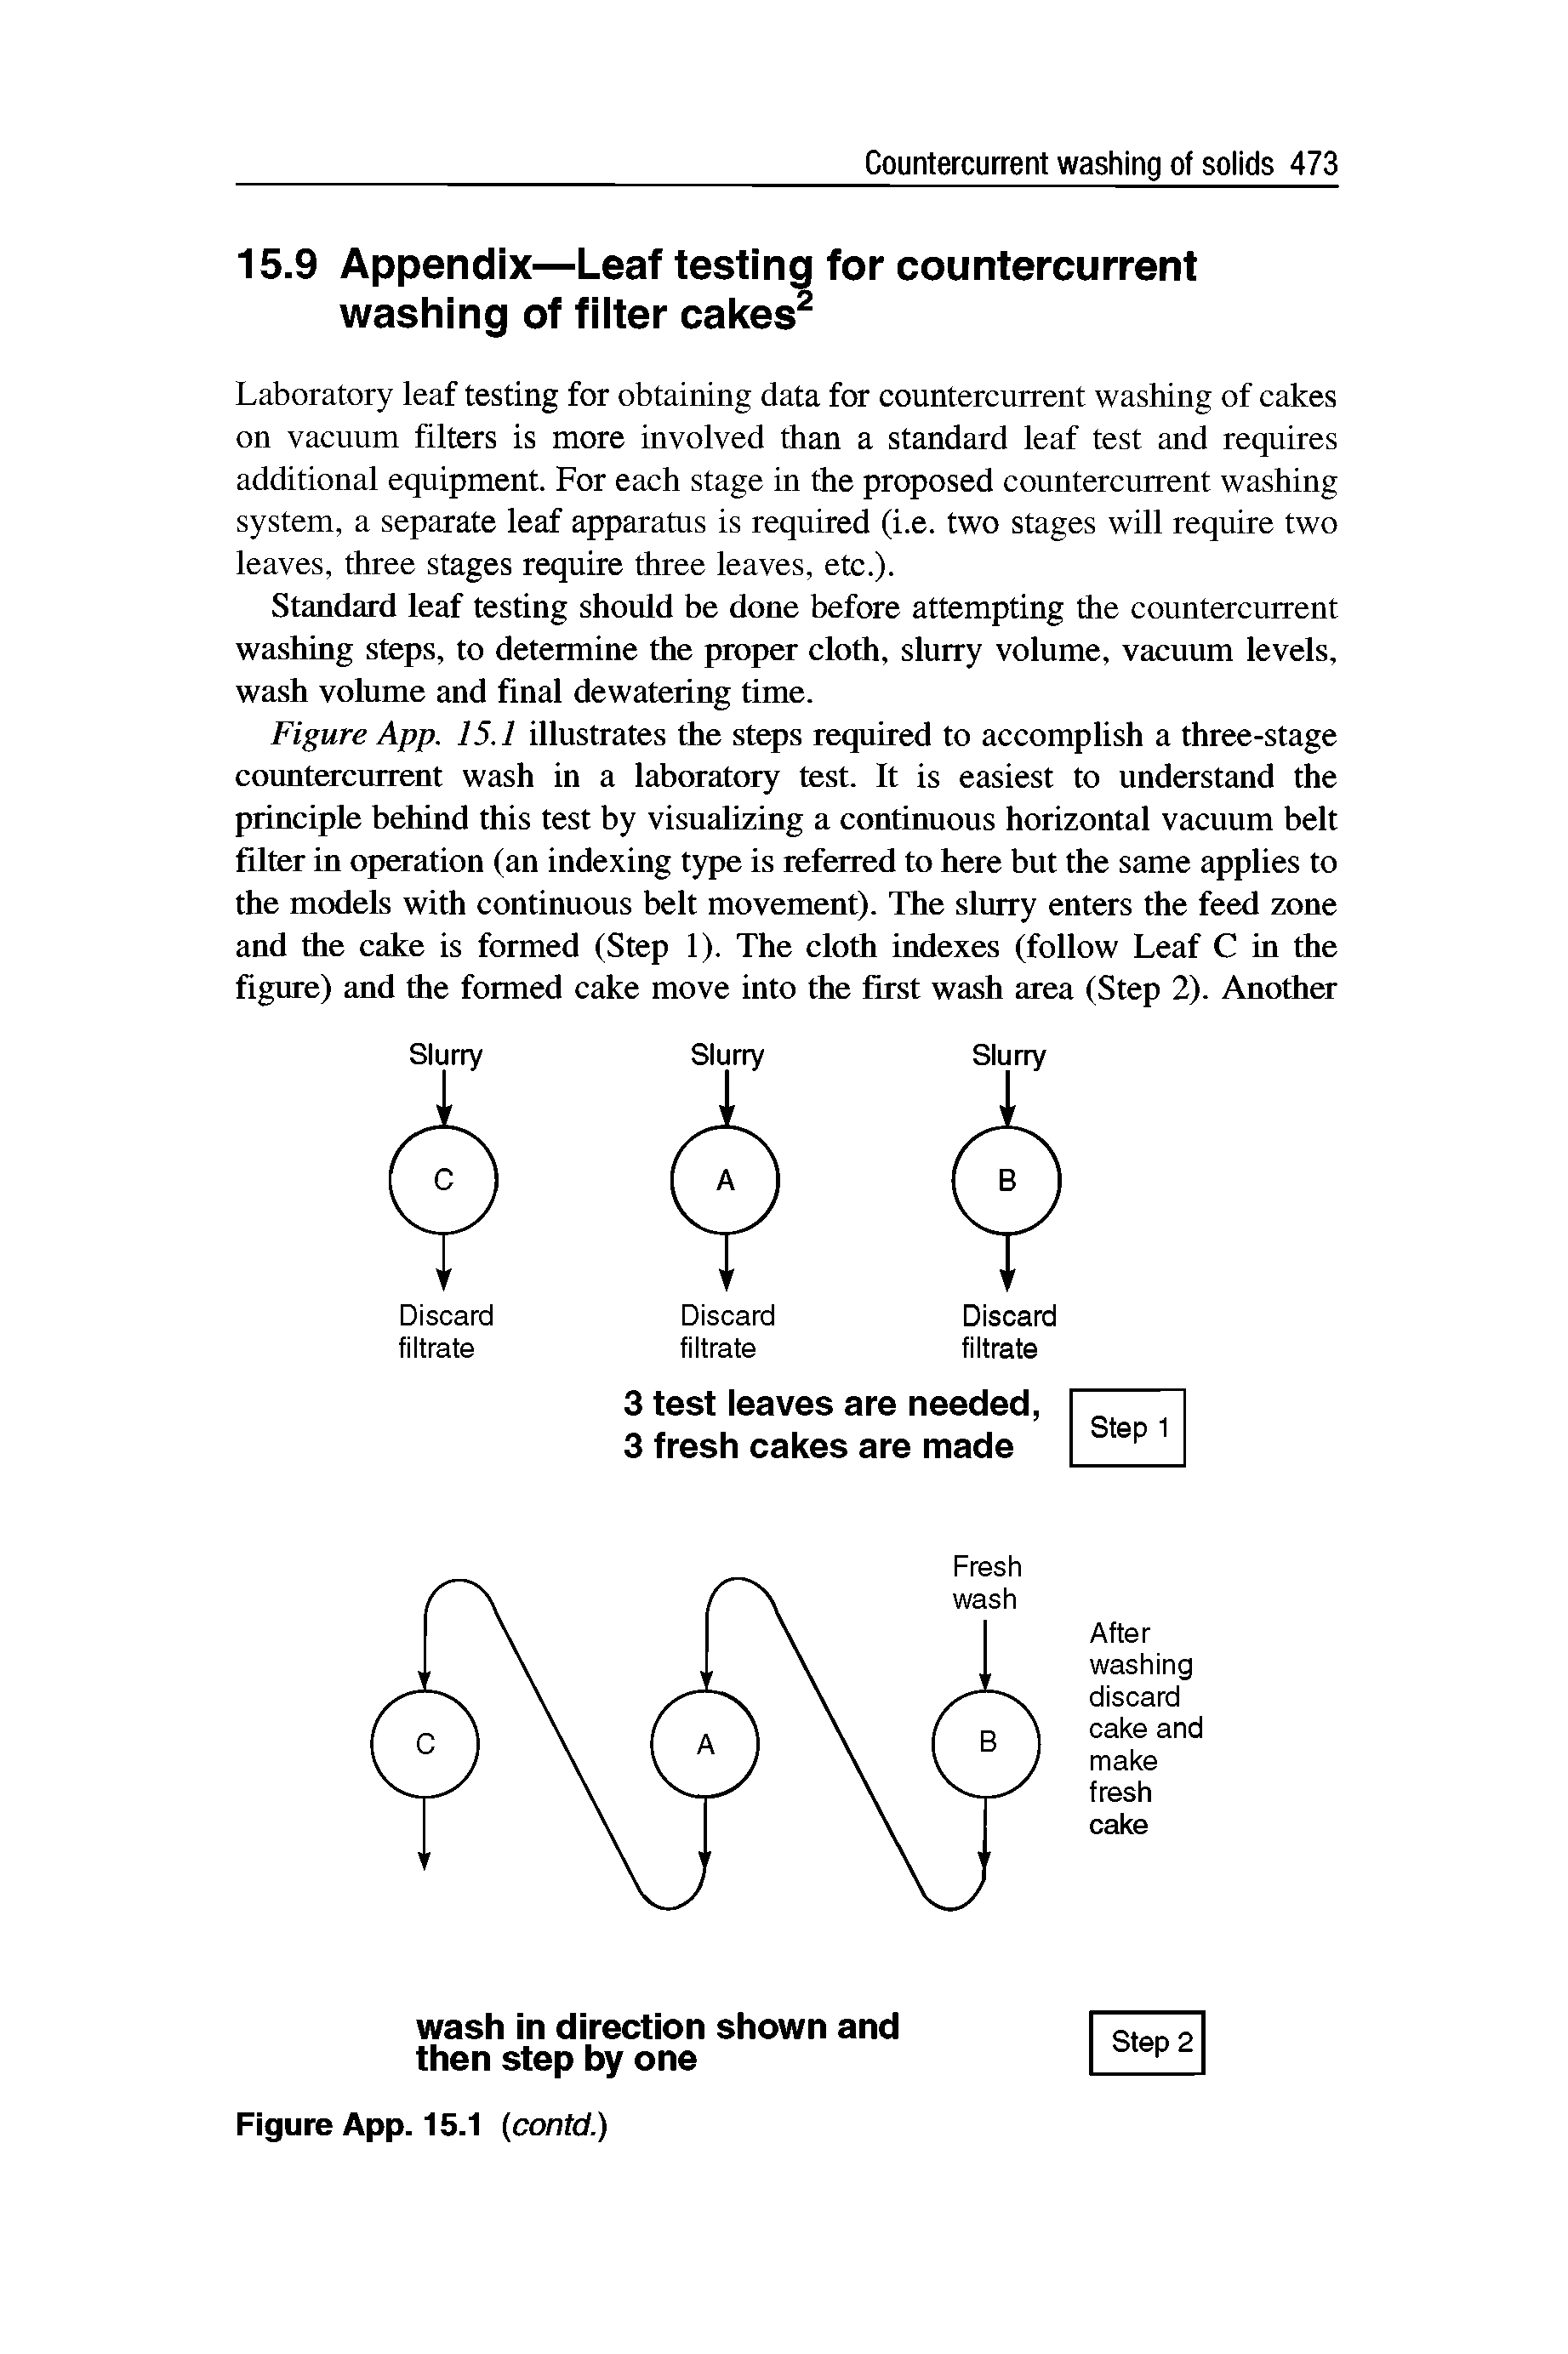 Figure App. 15.1 illustrates the steps required to accomplish a three-stage countercurrent wash in a laboratory test. It is easiest to understand the principle behind this test by visualizing a continuous horizontal vacuum belt filter in operation (an indexing type is referred to here but the same applies to the models with continuous belt movement). The slurry enters the feed zone and the cake is formed (Step 1). The cloth indexes (follow Leaf C in the figure) and the formed cake move into the first wash area (Step 2). Another...